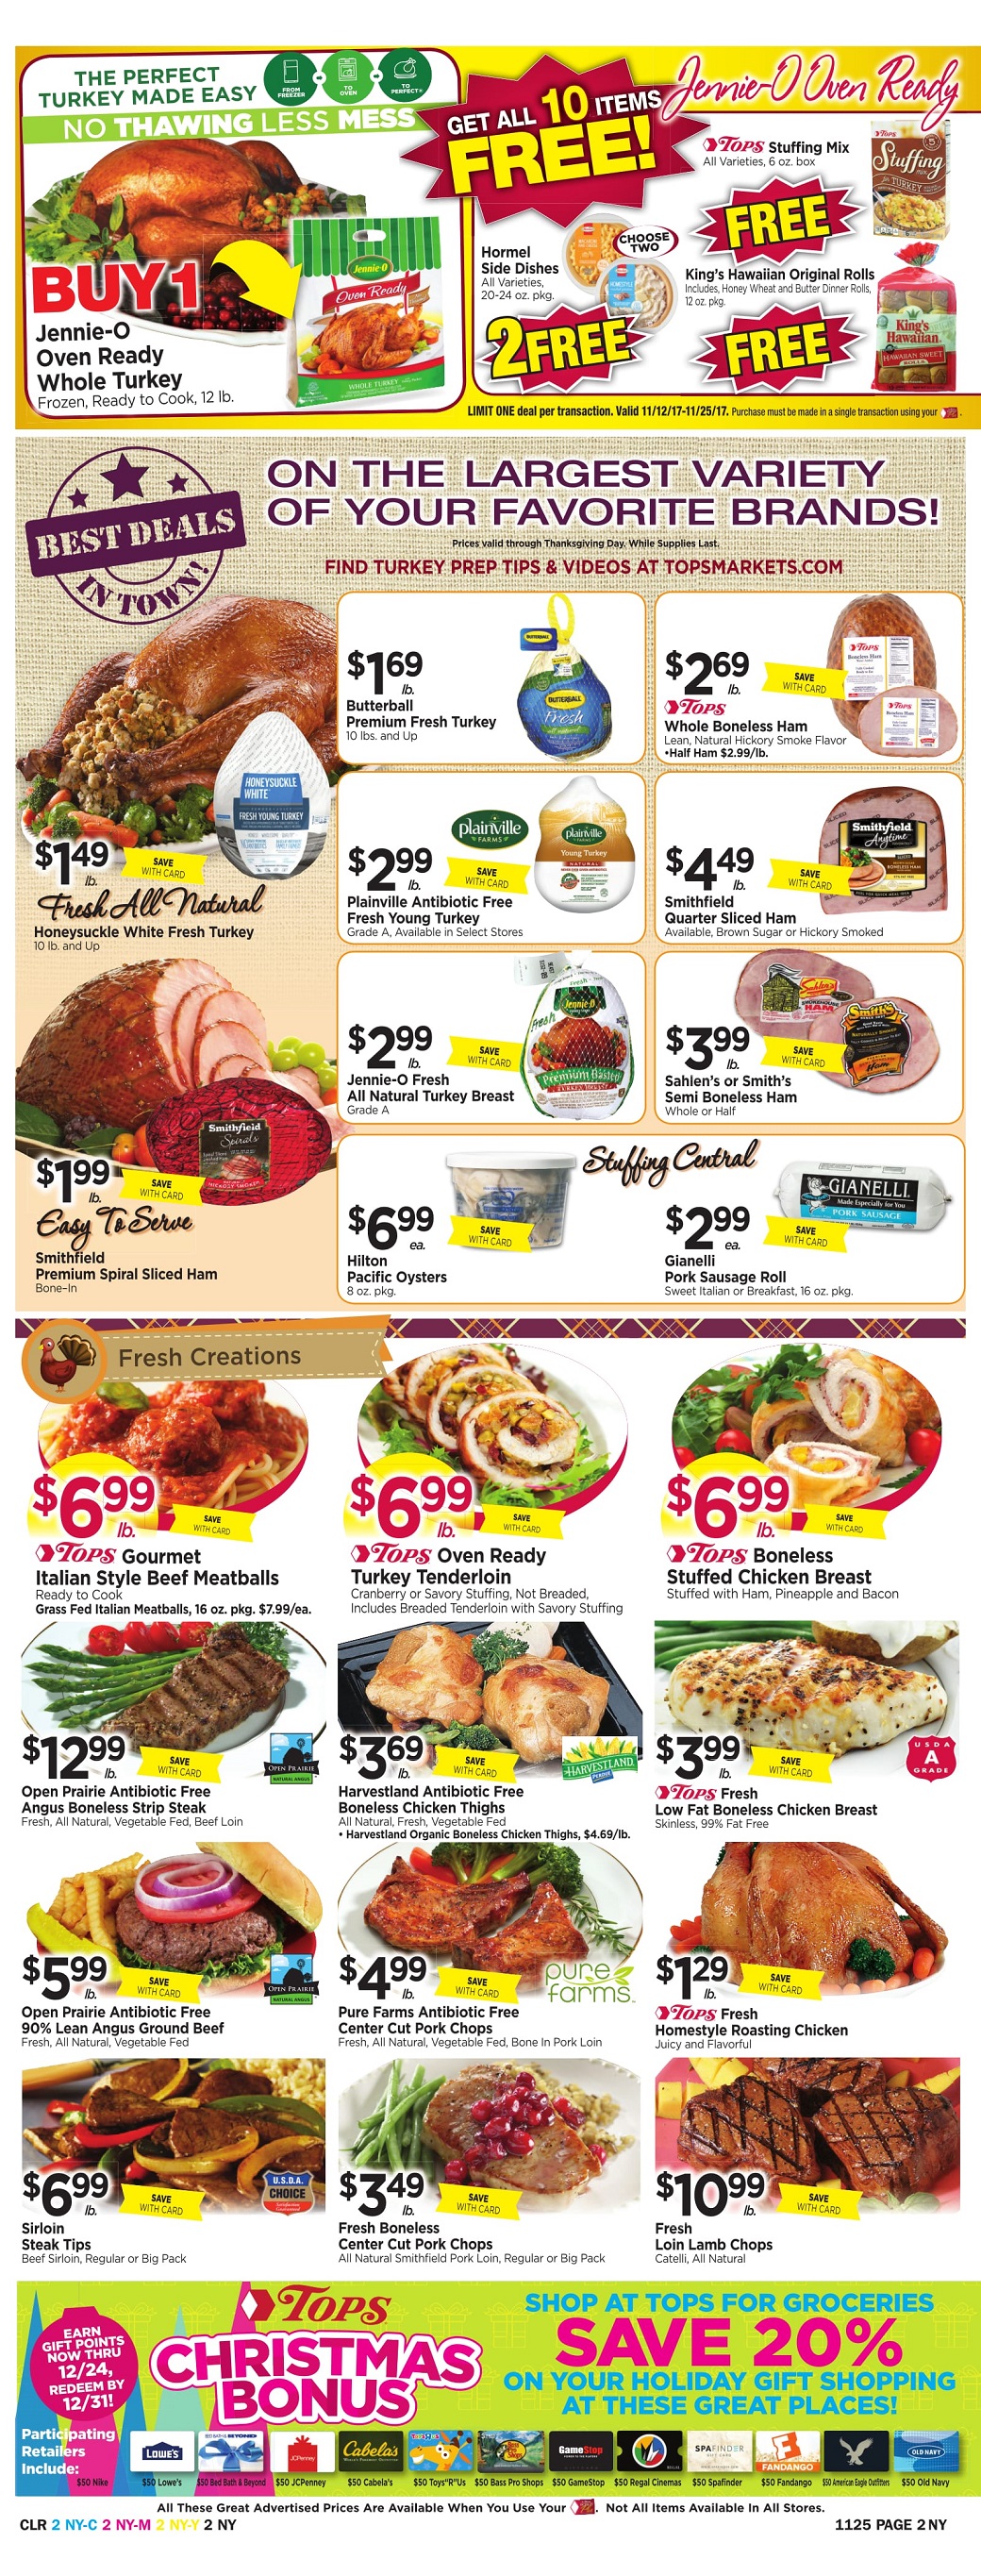 Tops Markets Ad Scan Week 11 19 Page 2